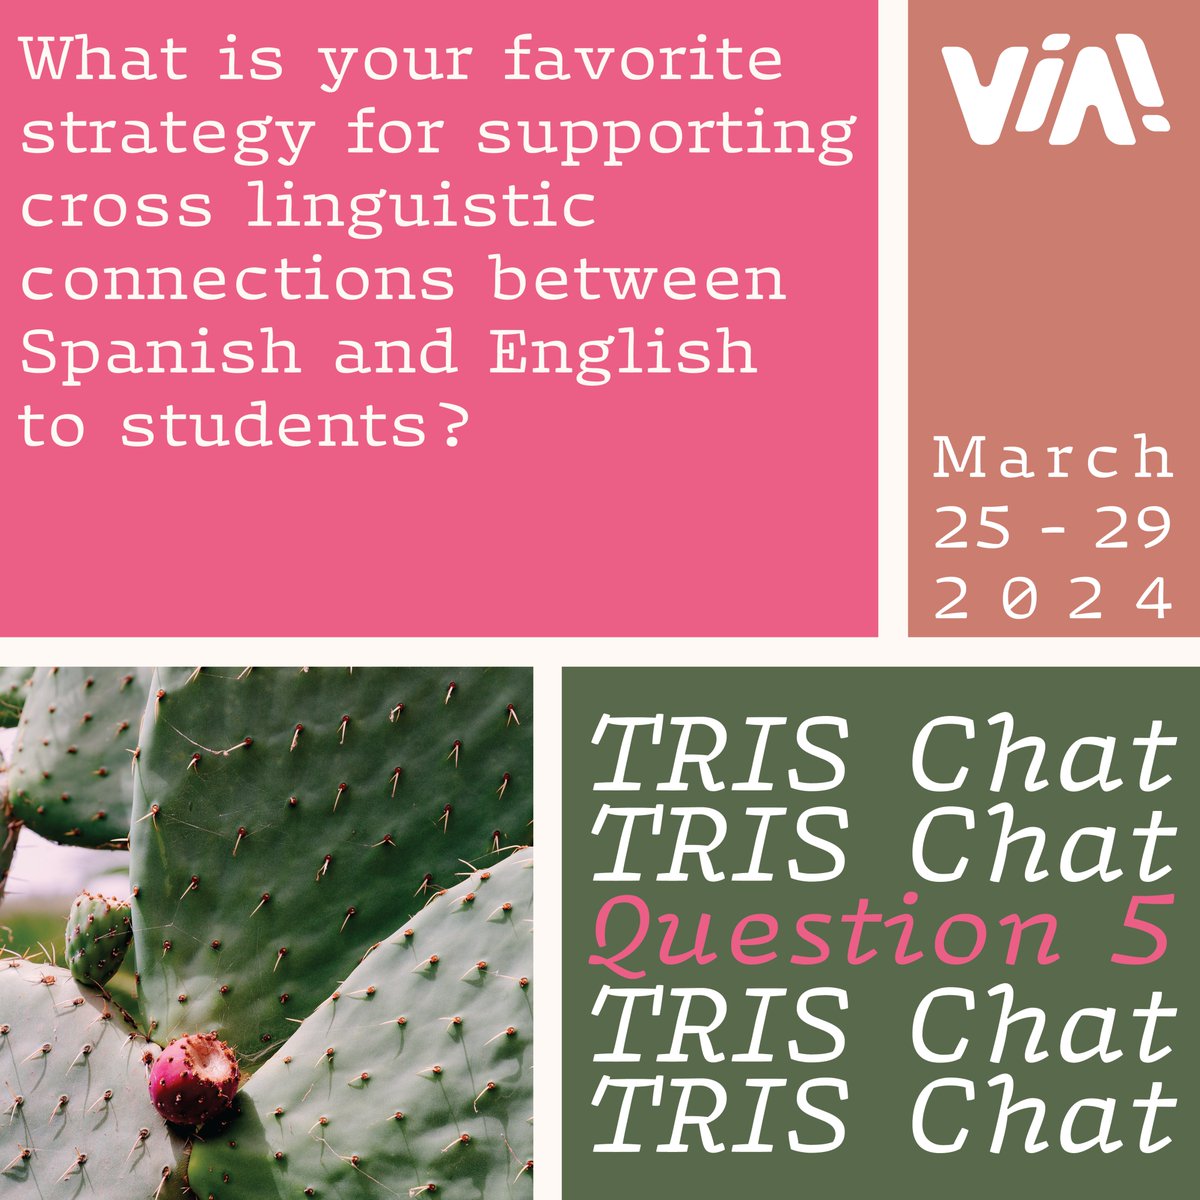 Q5: What is your favorite strategy for supporting cross linguistic connections between Spanish and English to students? #TRISchat